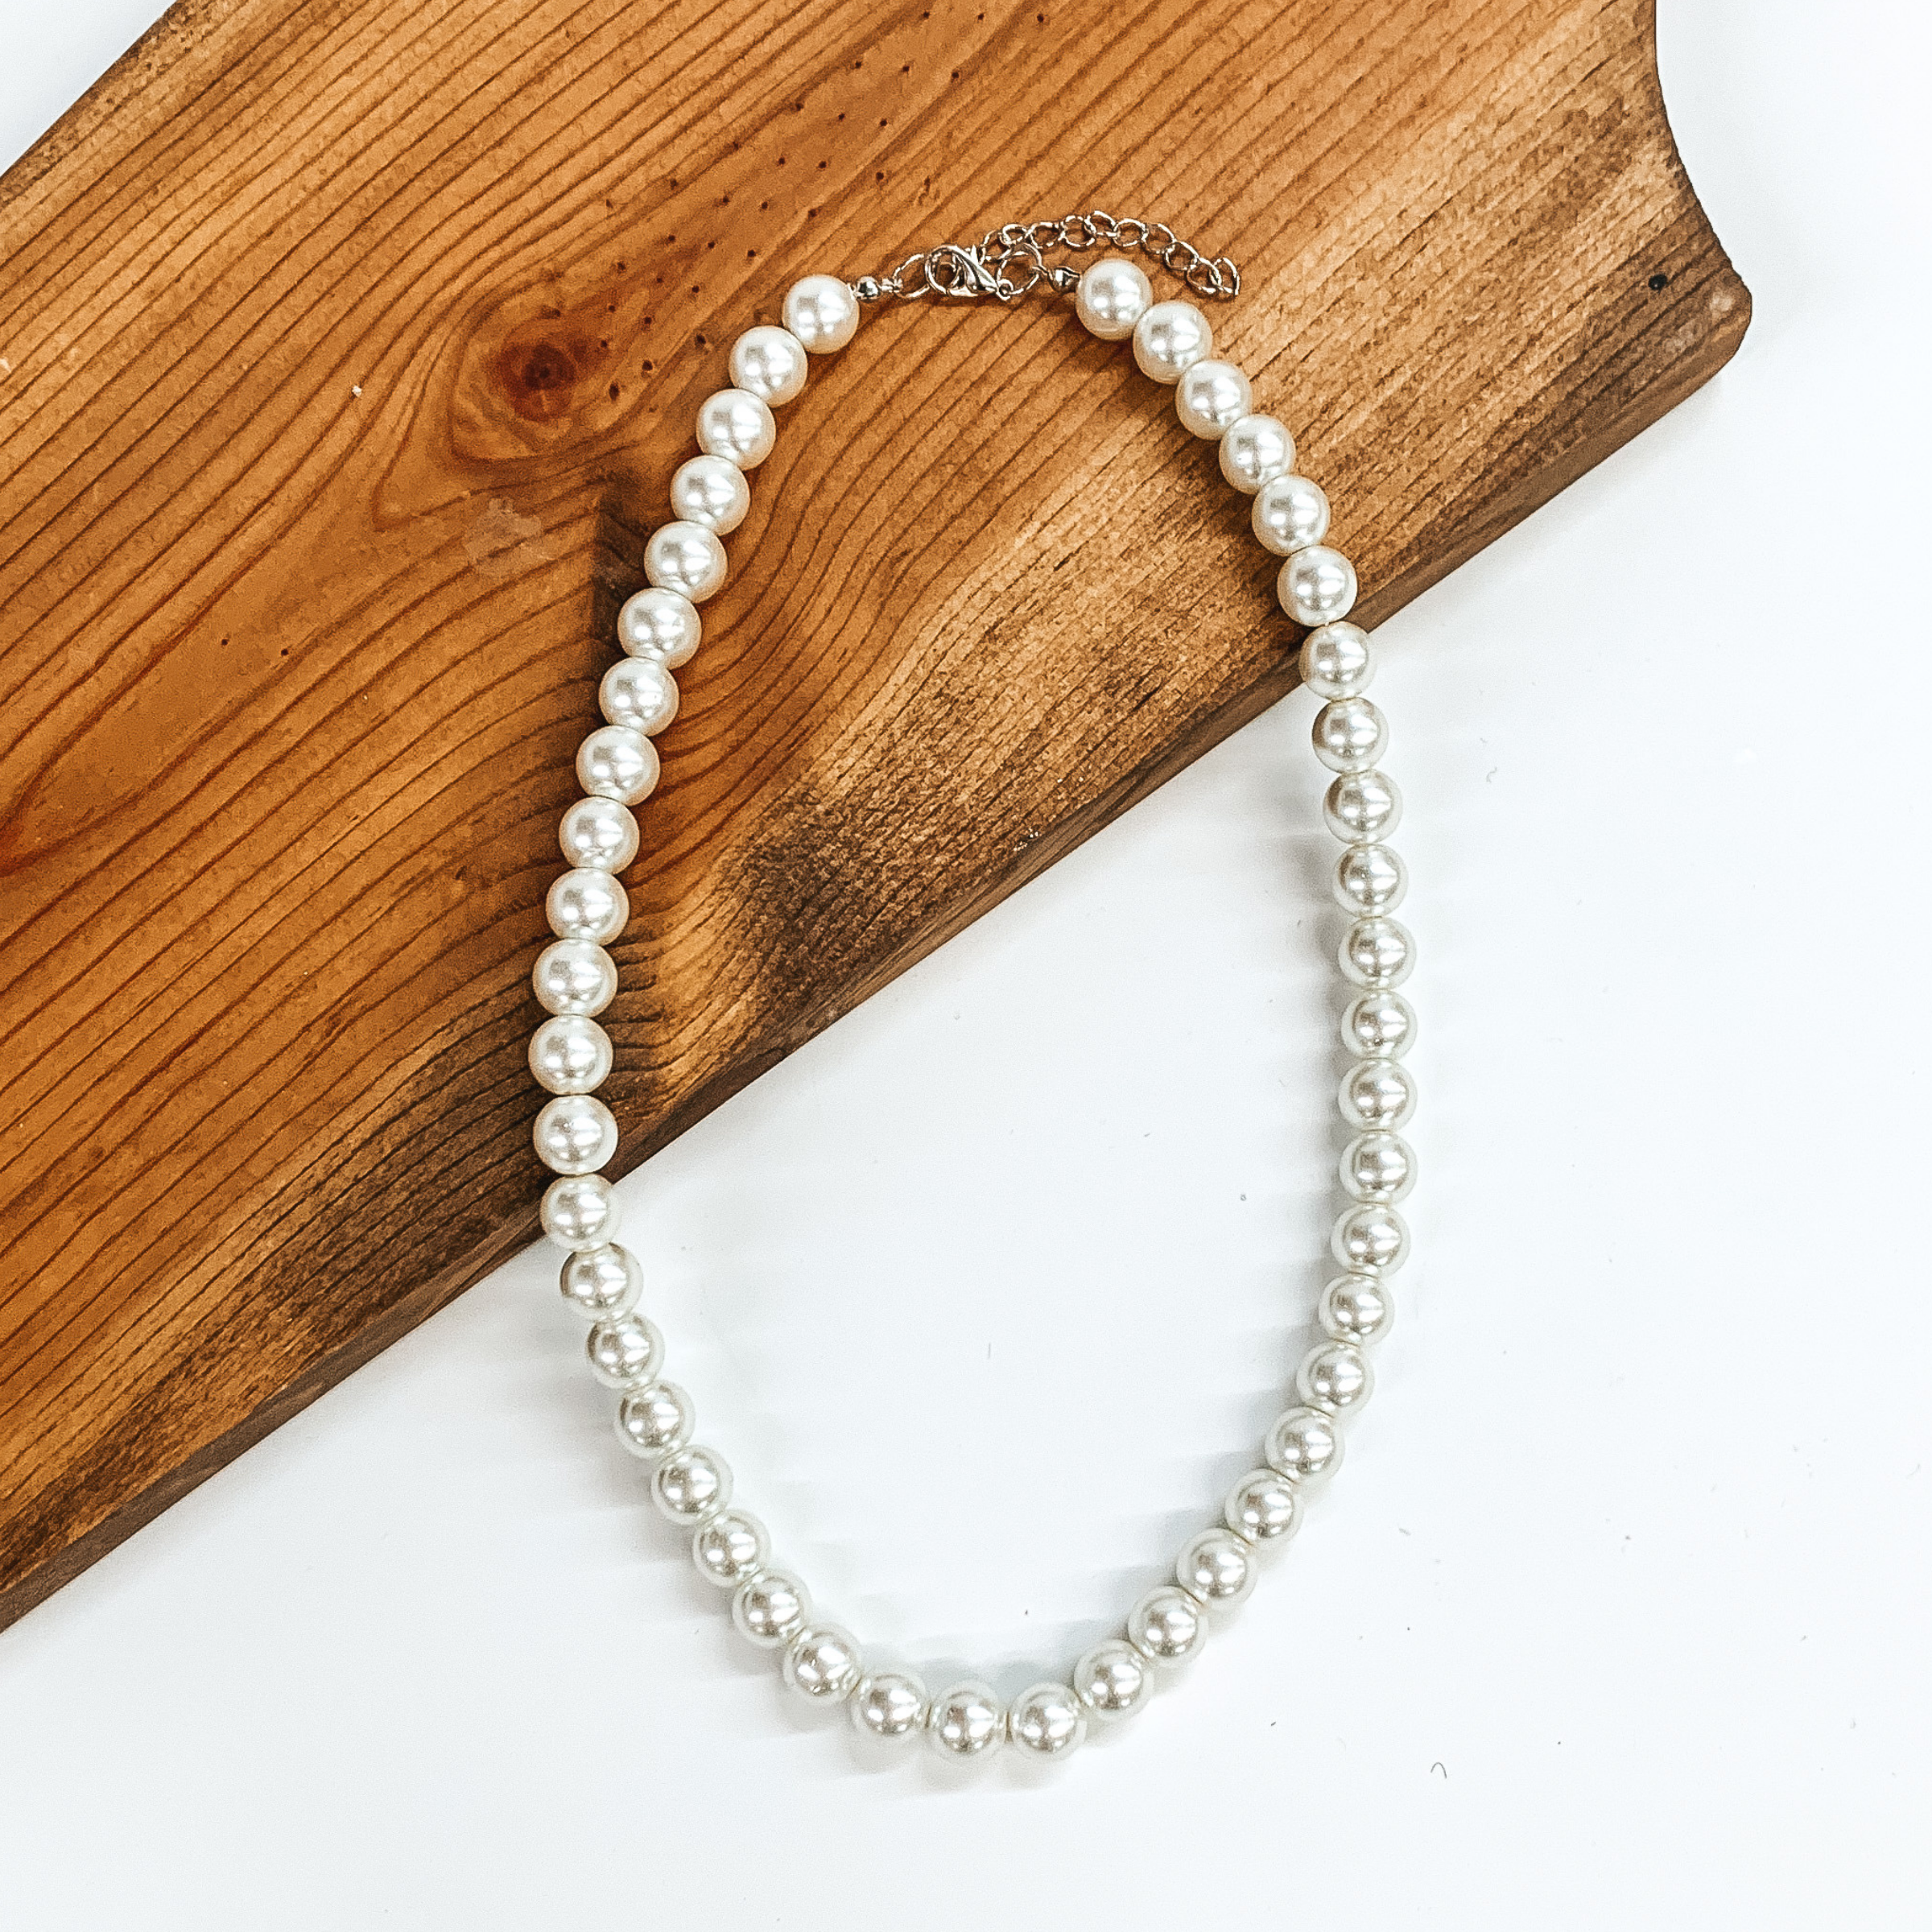 Buy 3 for $10 | Pearl Beaded Necklaces in Neutral Colors - Giddy Up Glamour Boutique